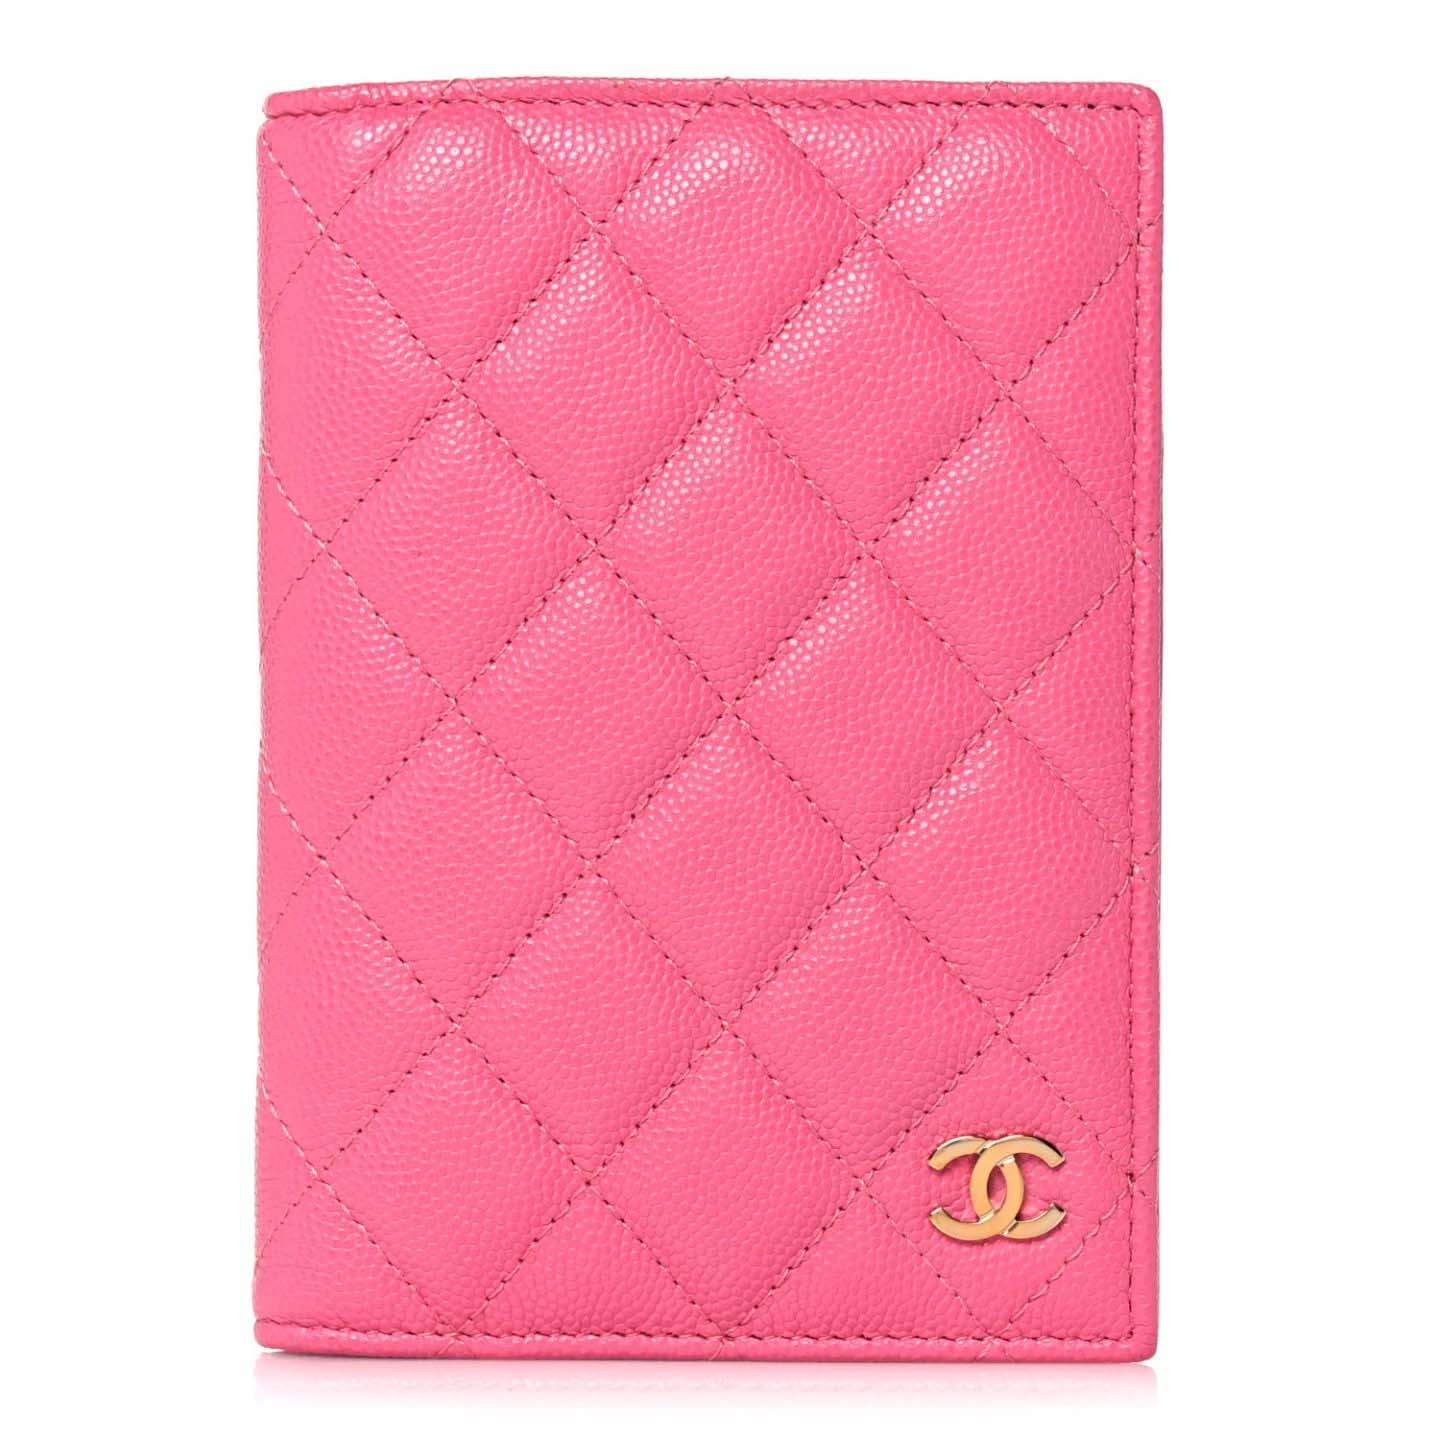 Chanel Caviar Quilted Passport Cover